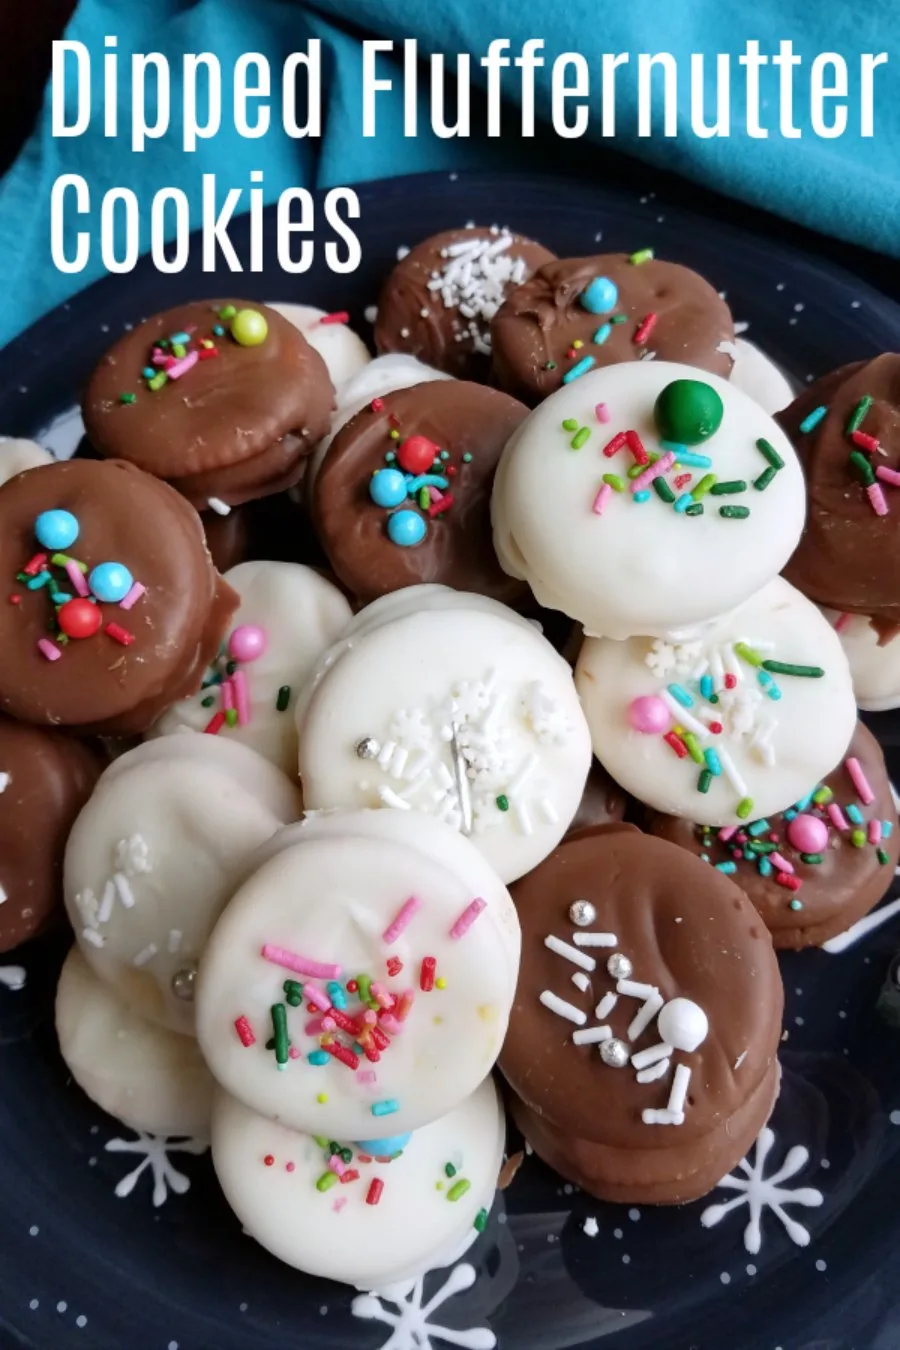 The perfect combination of textures and flavors, these chocolate dipped fluffernutter cookies are a great no bake treat. Peanut butter and marshmallow come together for the ultimate sweet and salty, crunchy and creamy cookies.